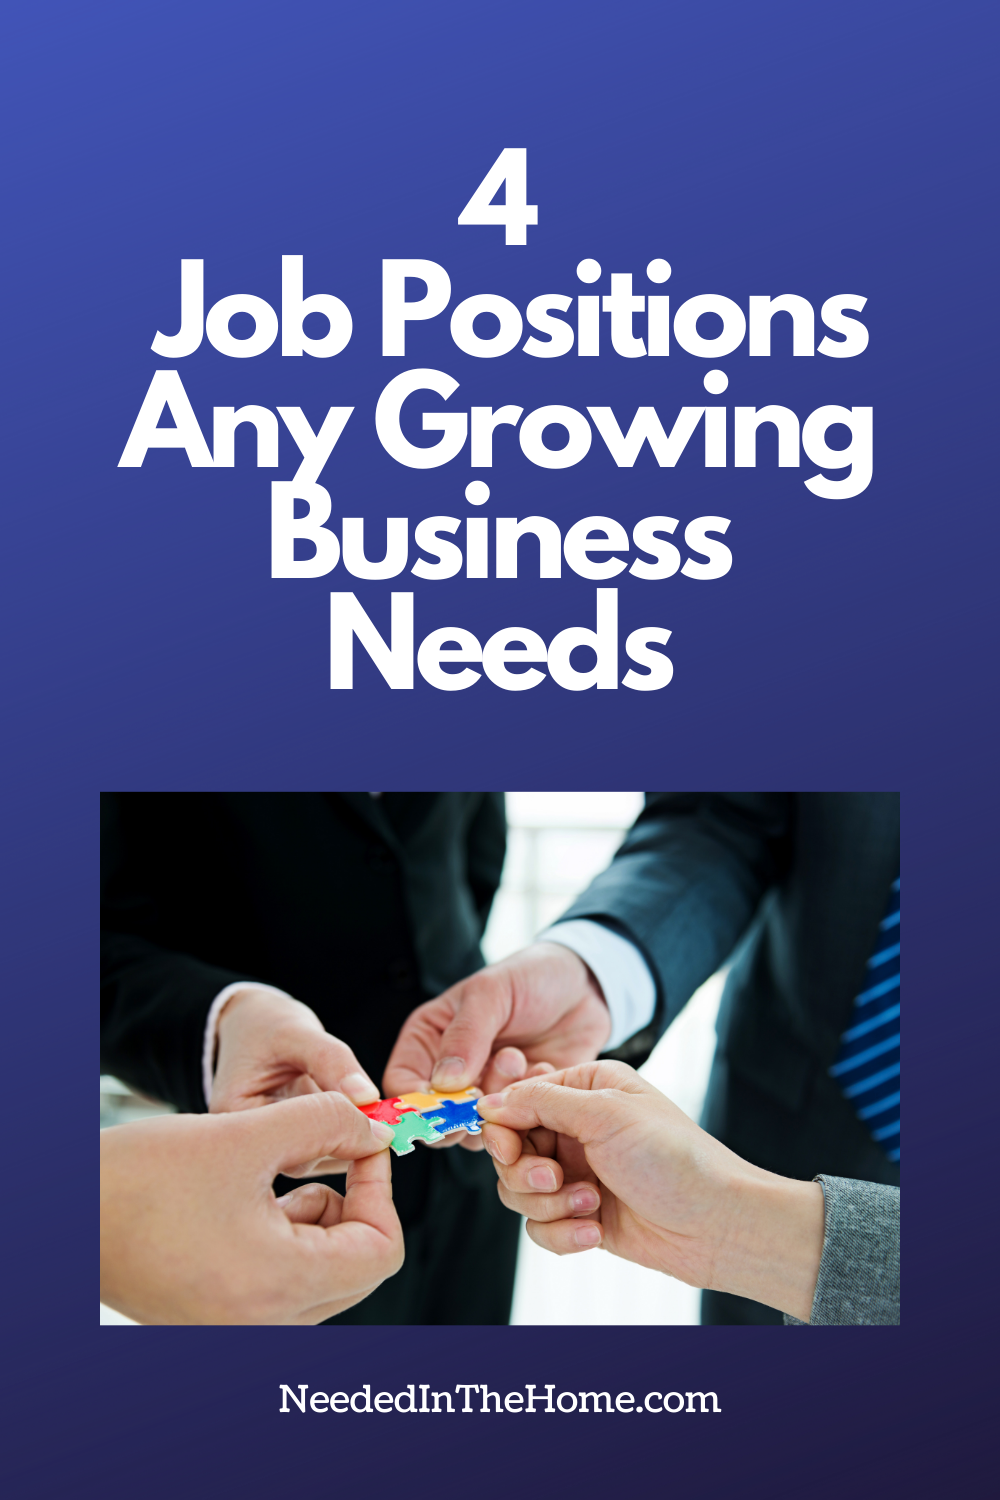 pinterest-pin-description 4 job positions any growing business needs four hands holding puzzle pieces put together neededinthehome